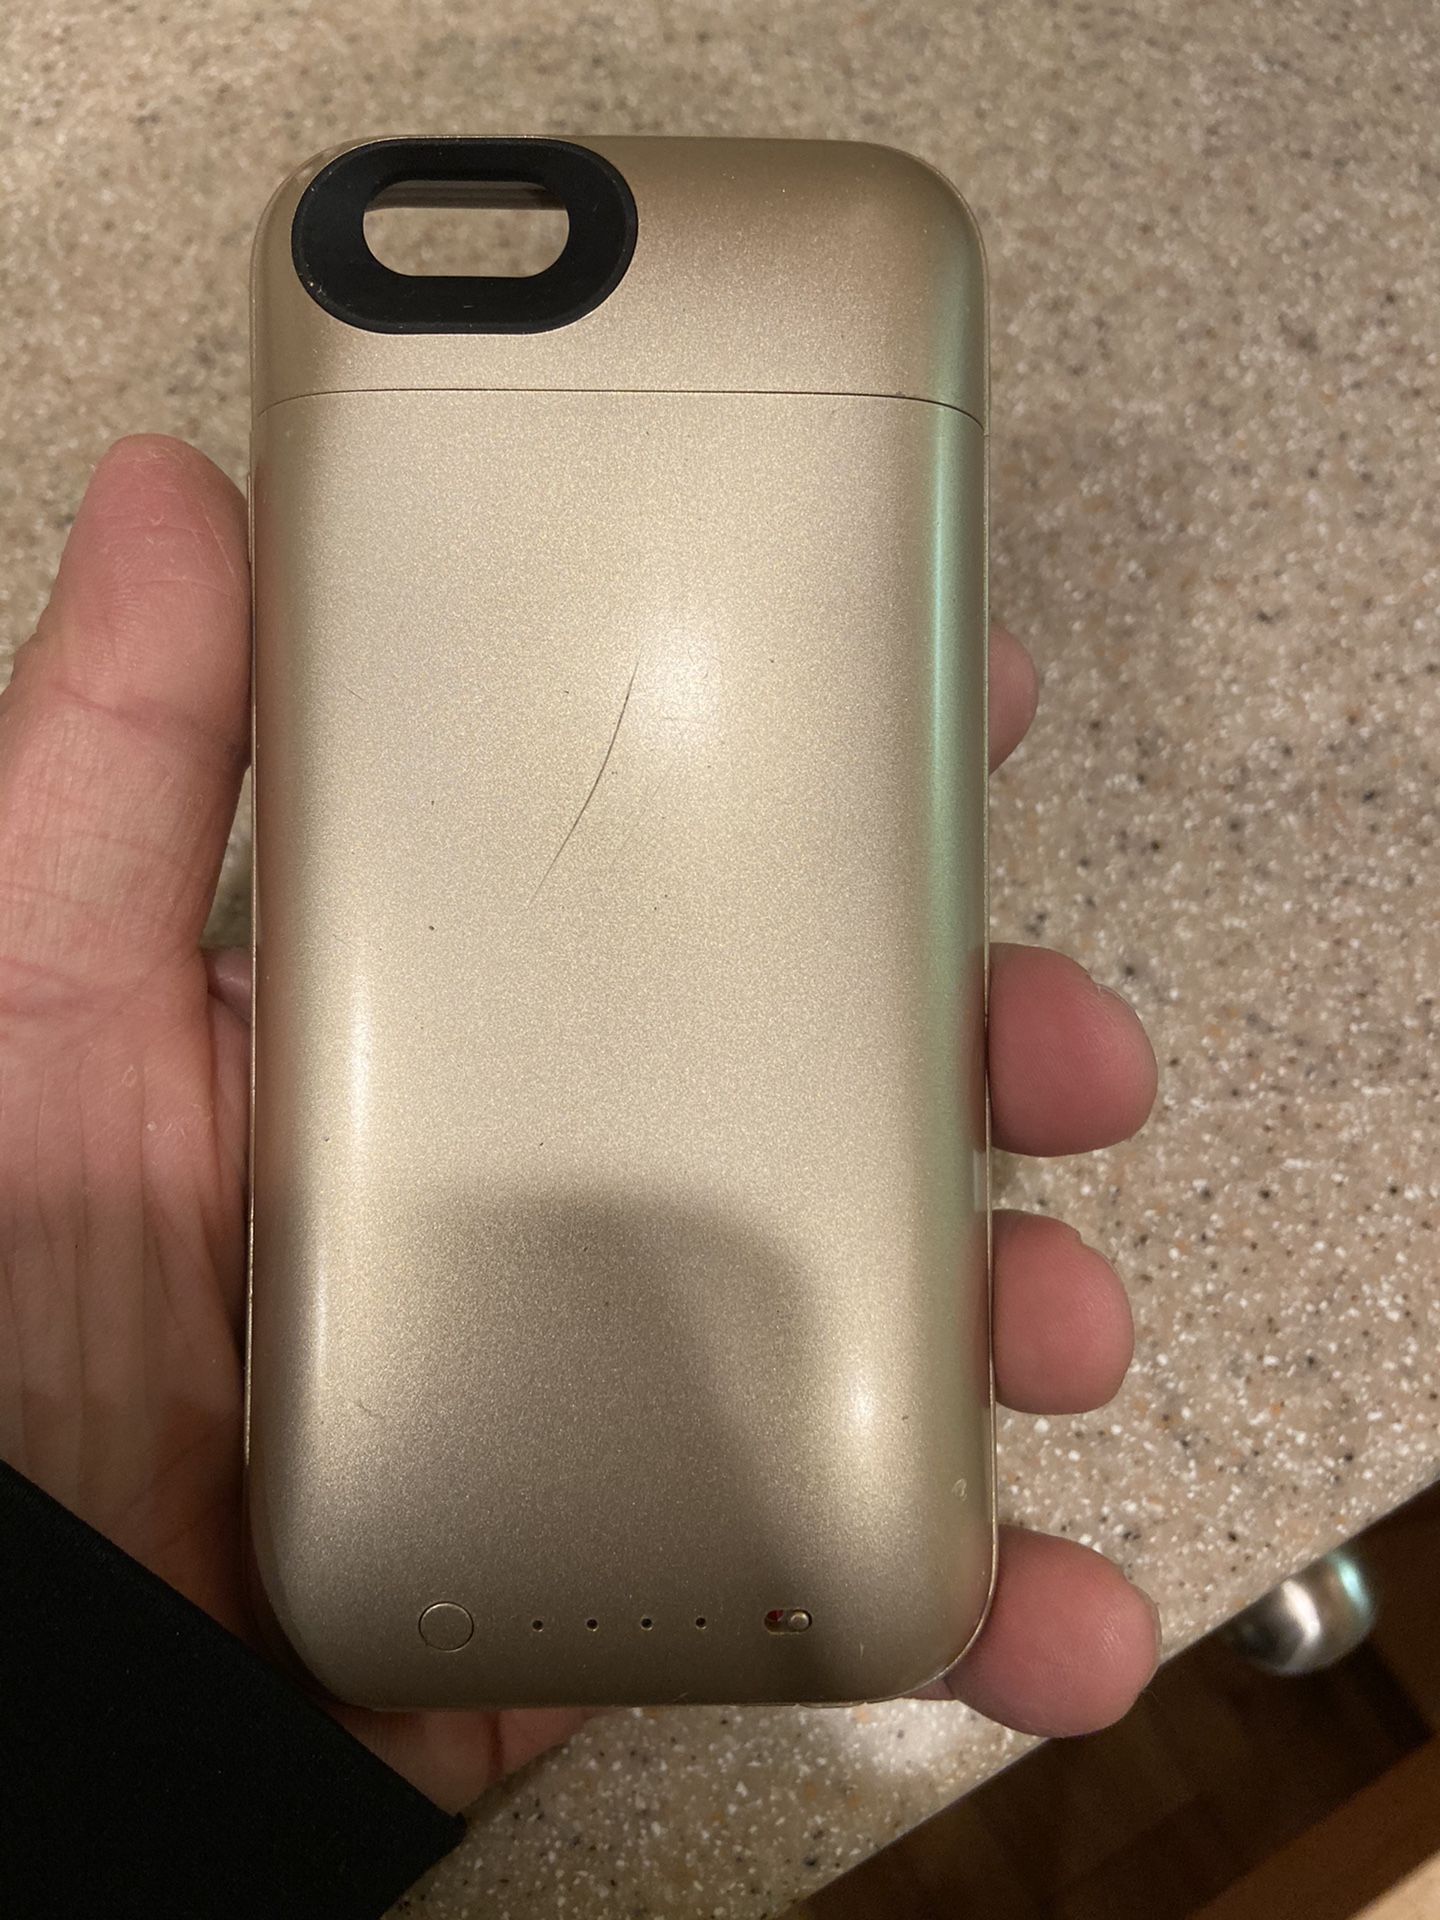 Mophie case for iPhone 6/6s